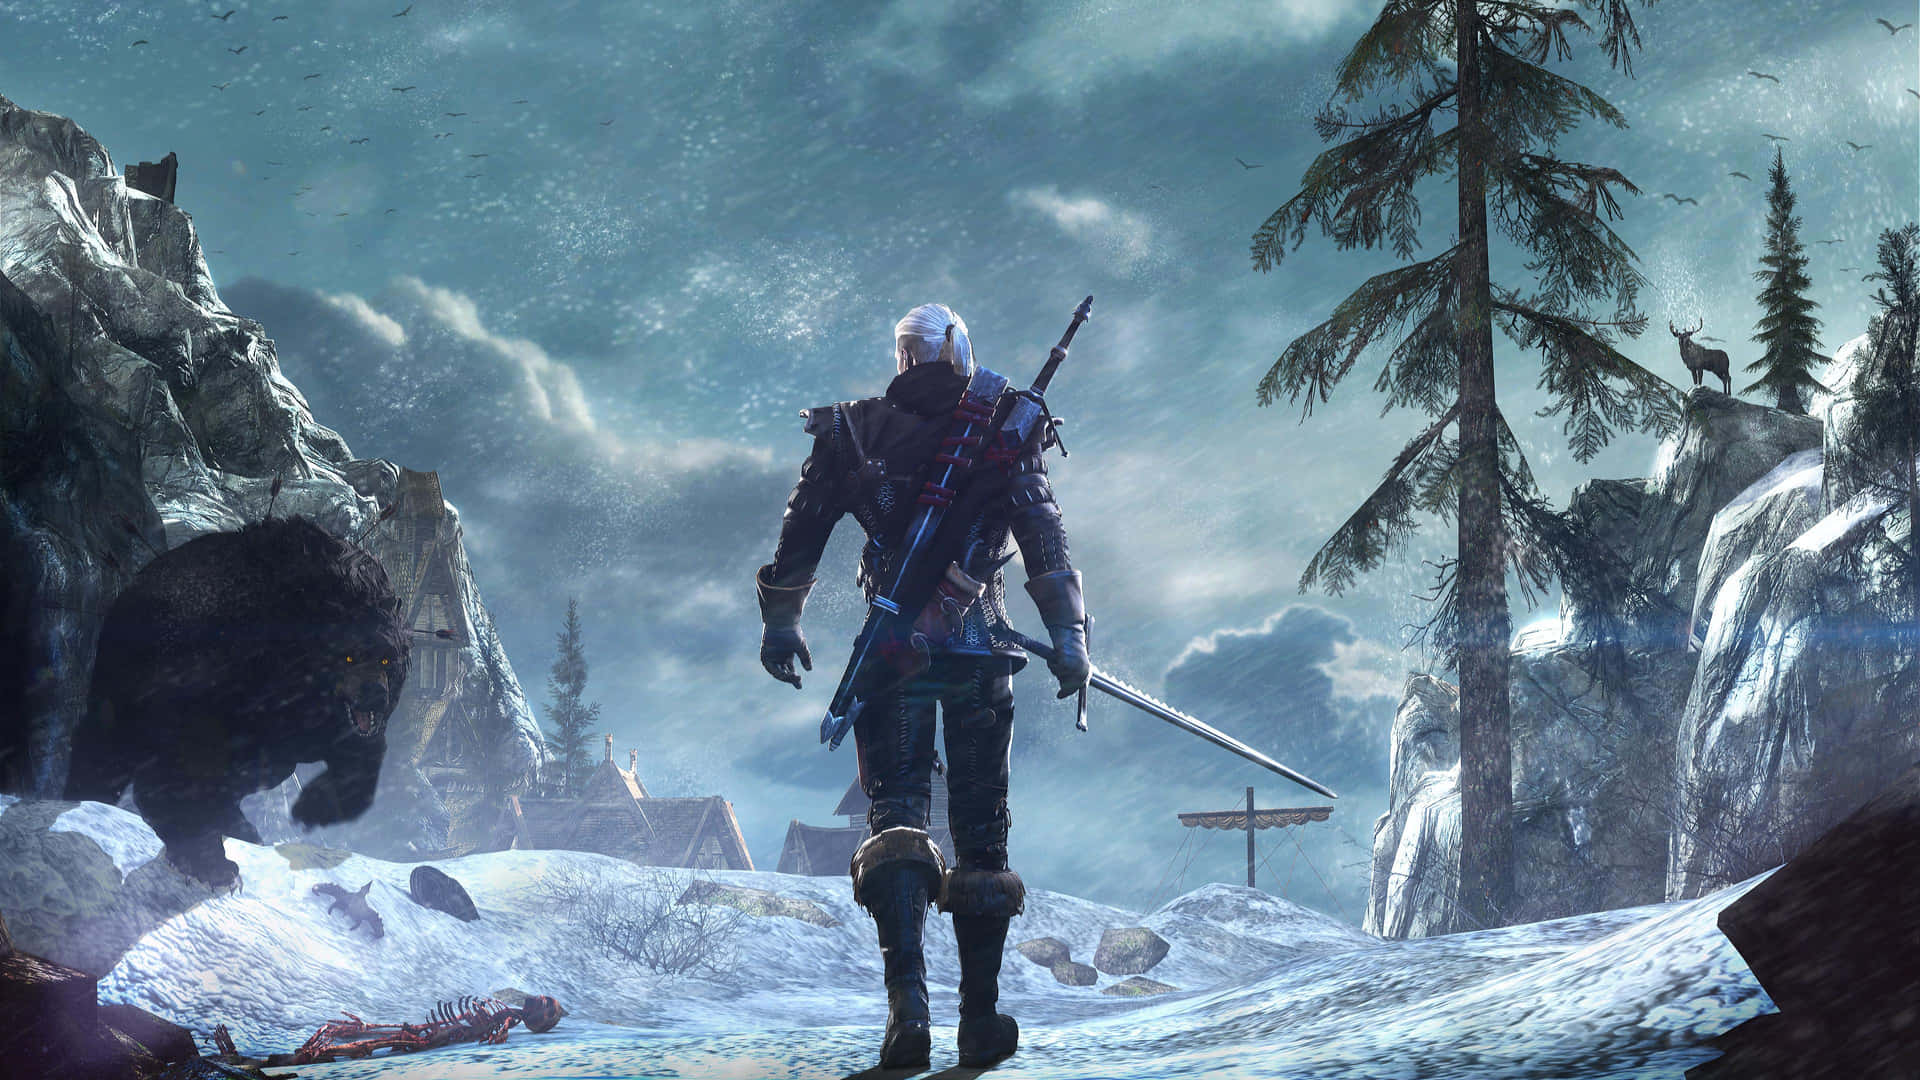 Geralt of Rivia in action in The Witcher 3: Wild Hunt game